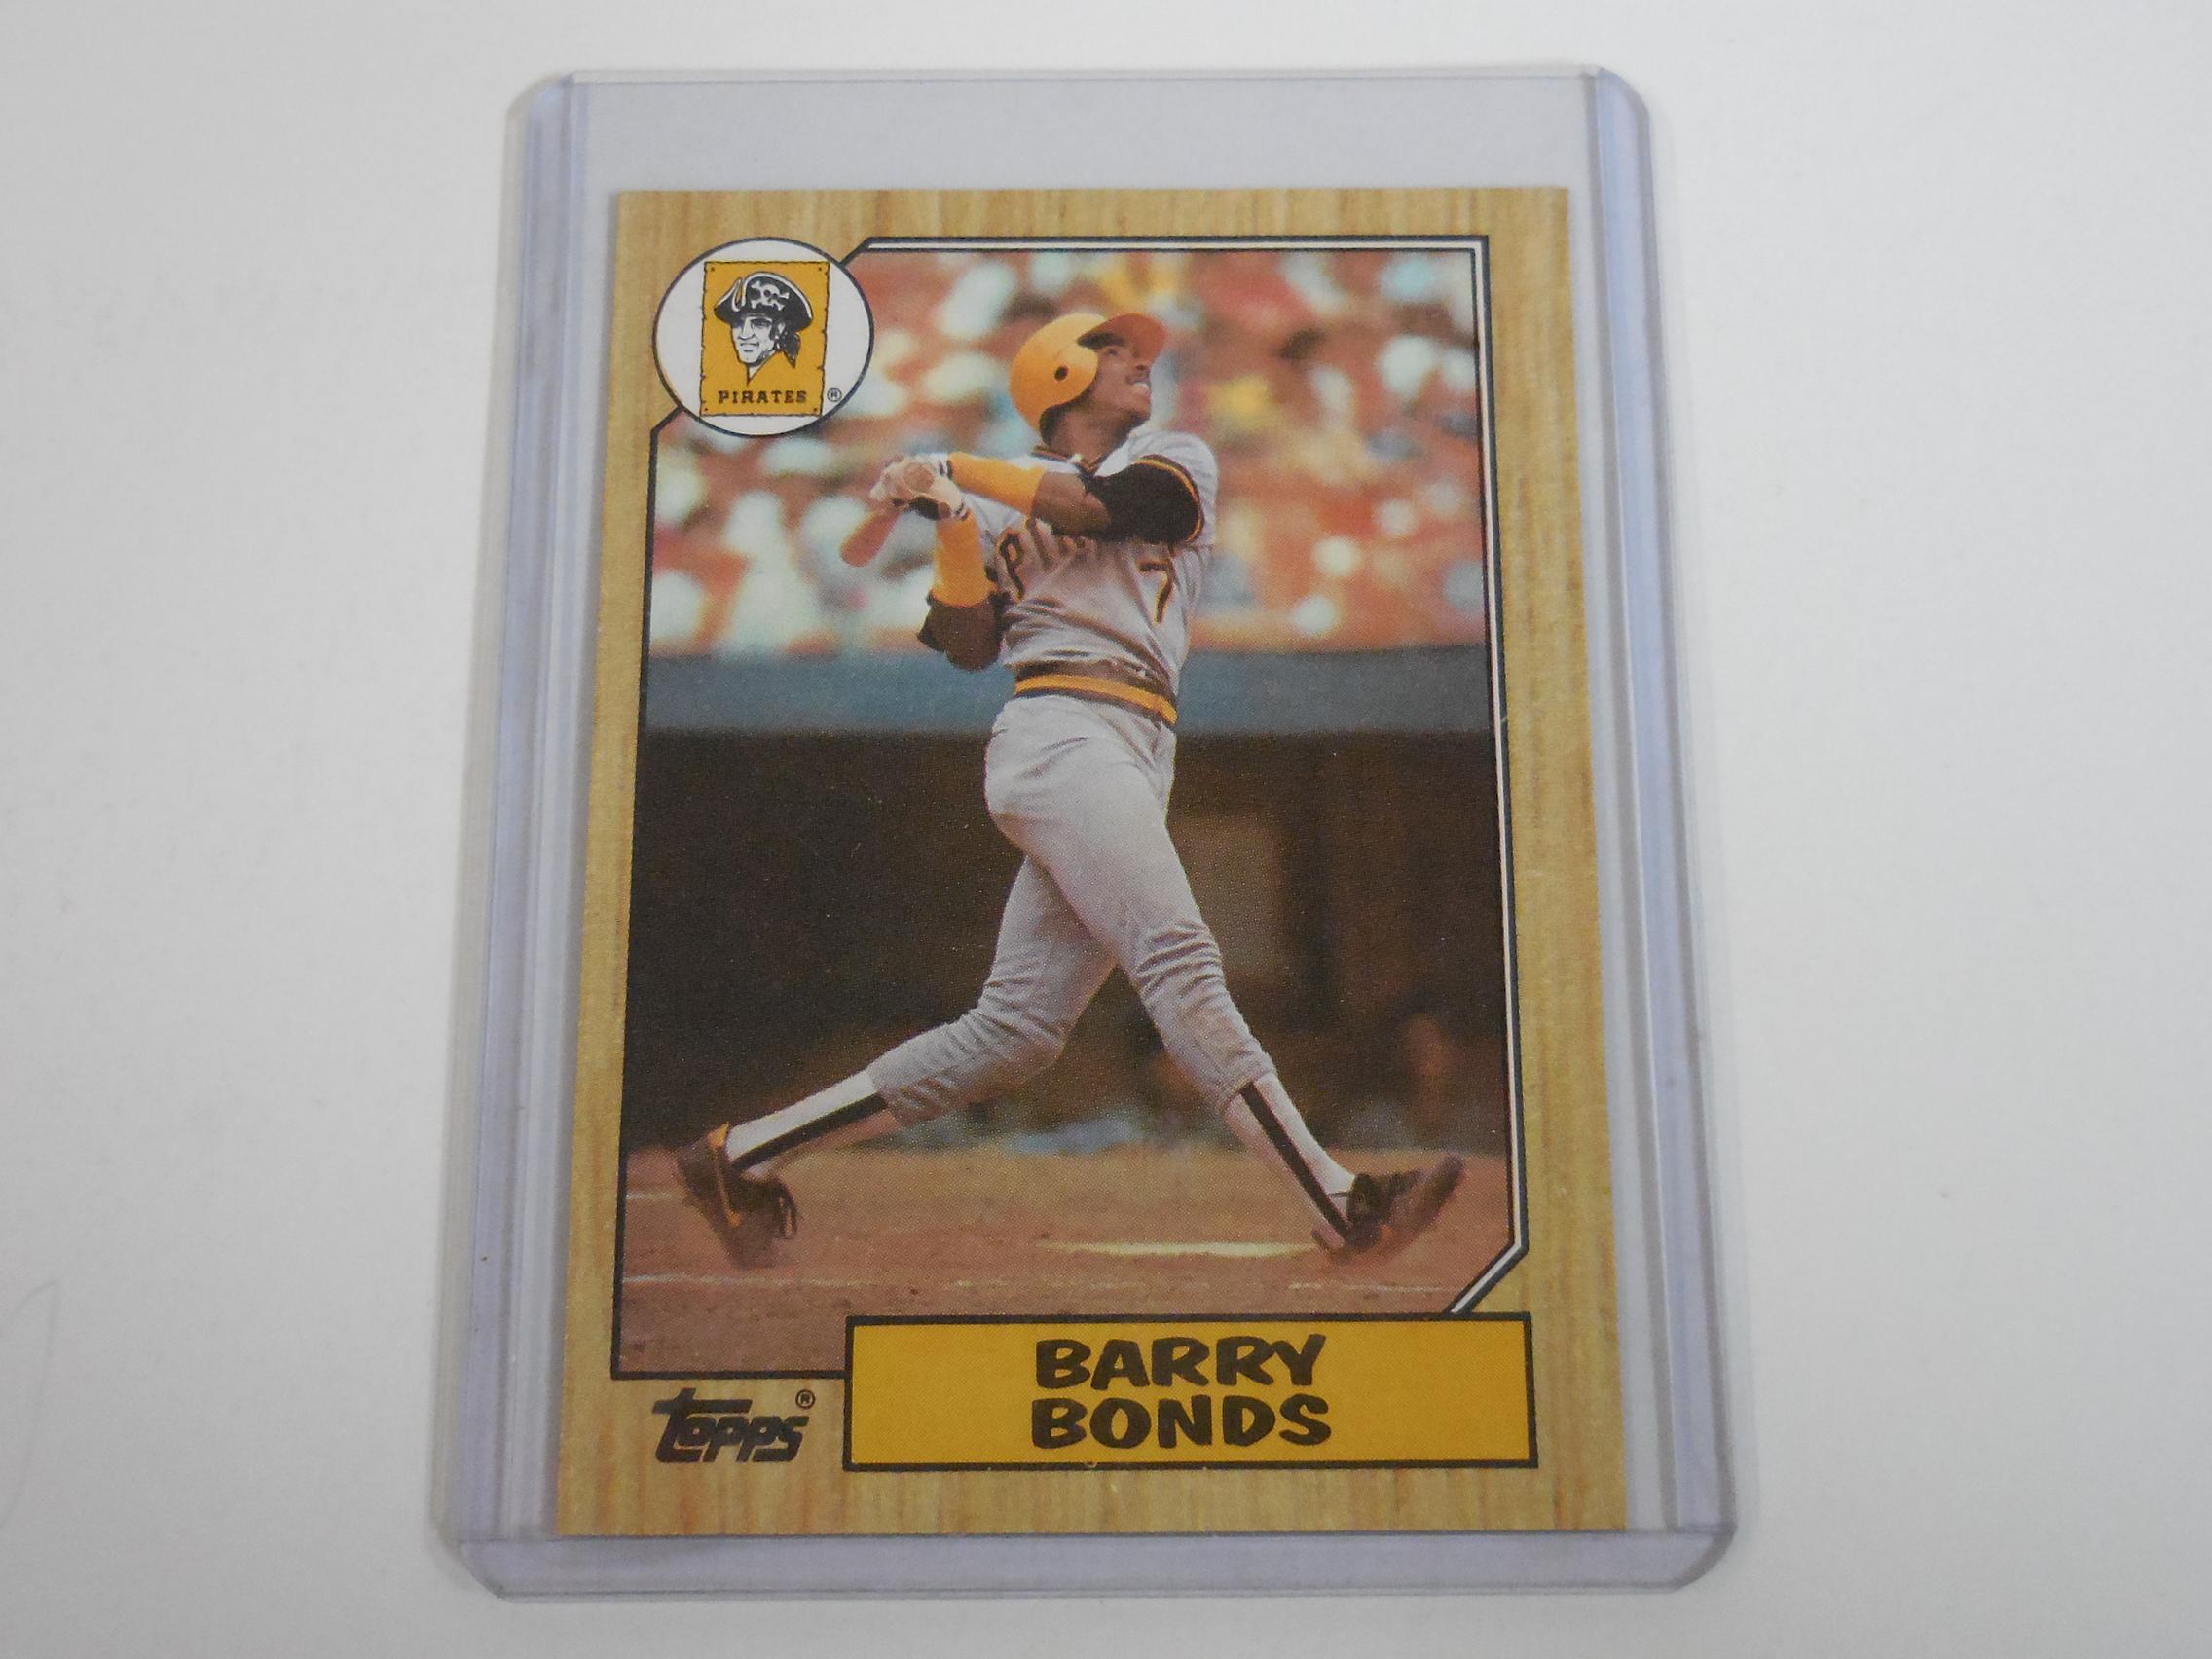 1987 TOPPS BASEBALL BARRY BONDS ROOKIE CARD PITTSBURGH PIRATES RC